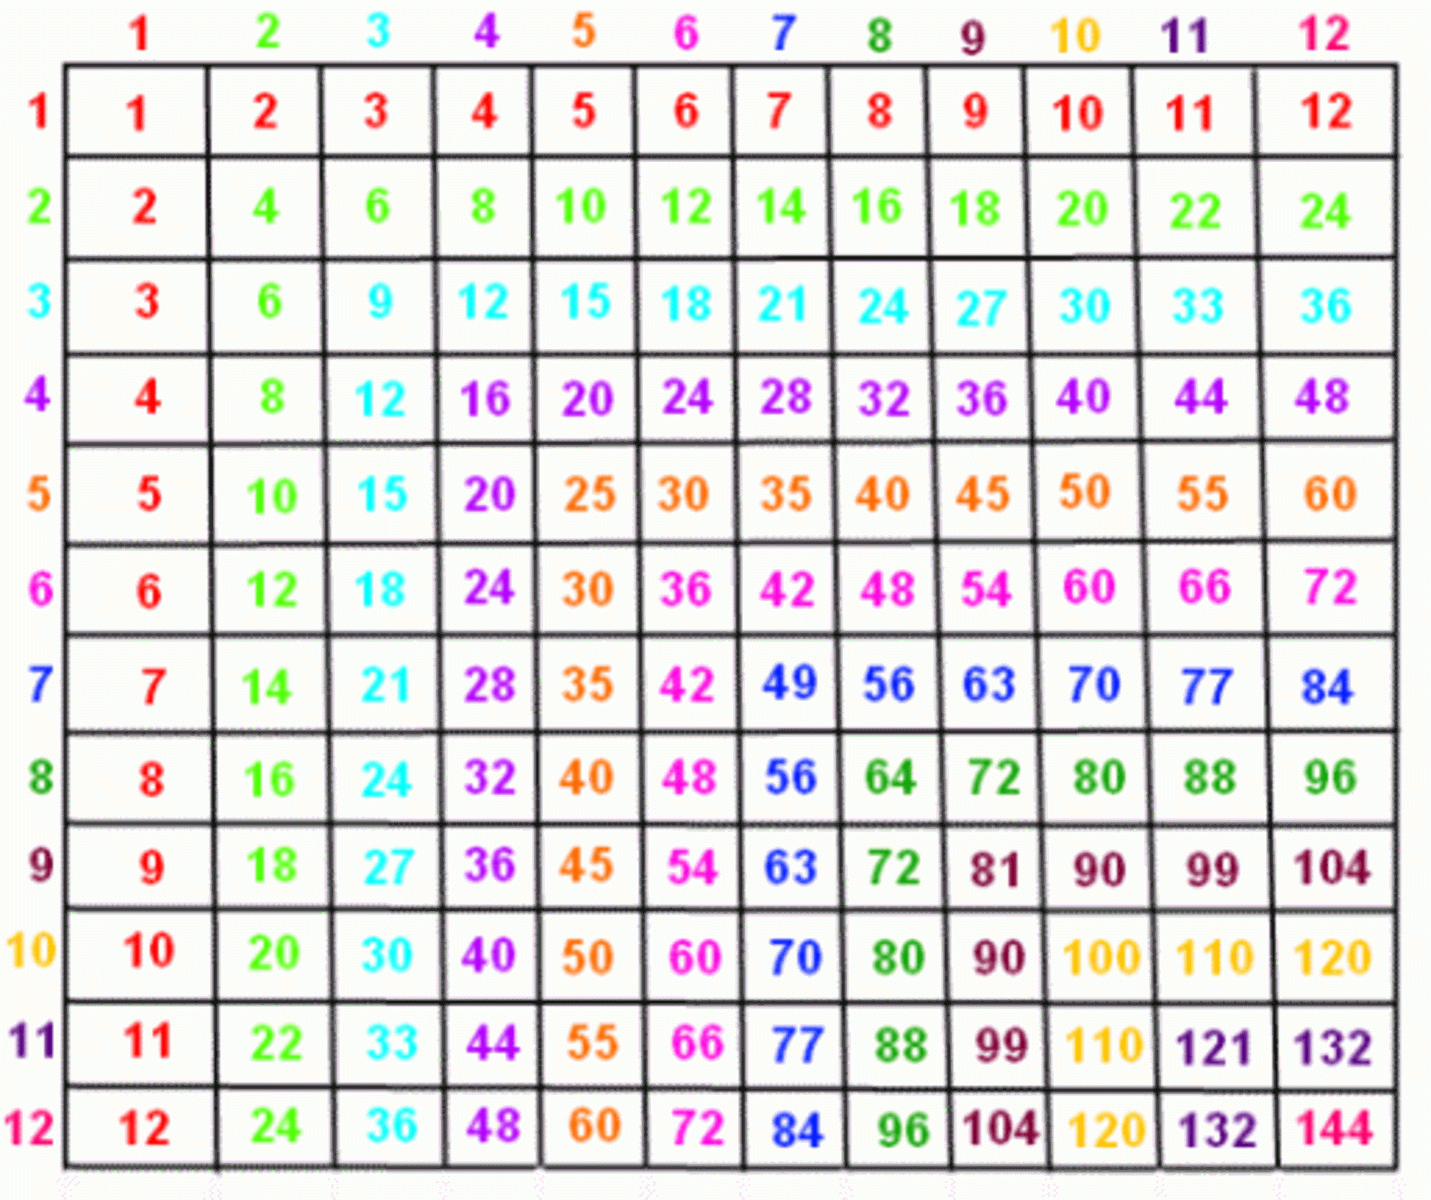 multiplication table goes up 100